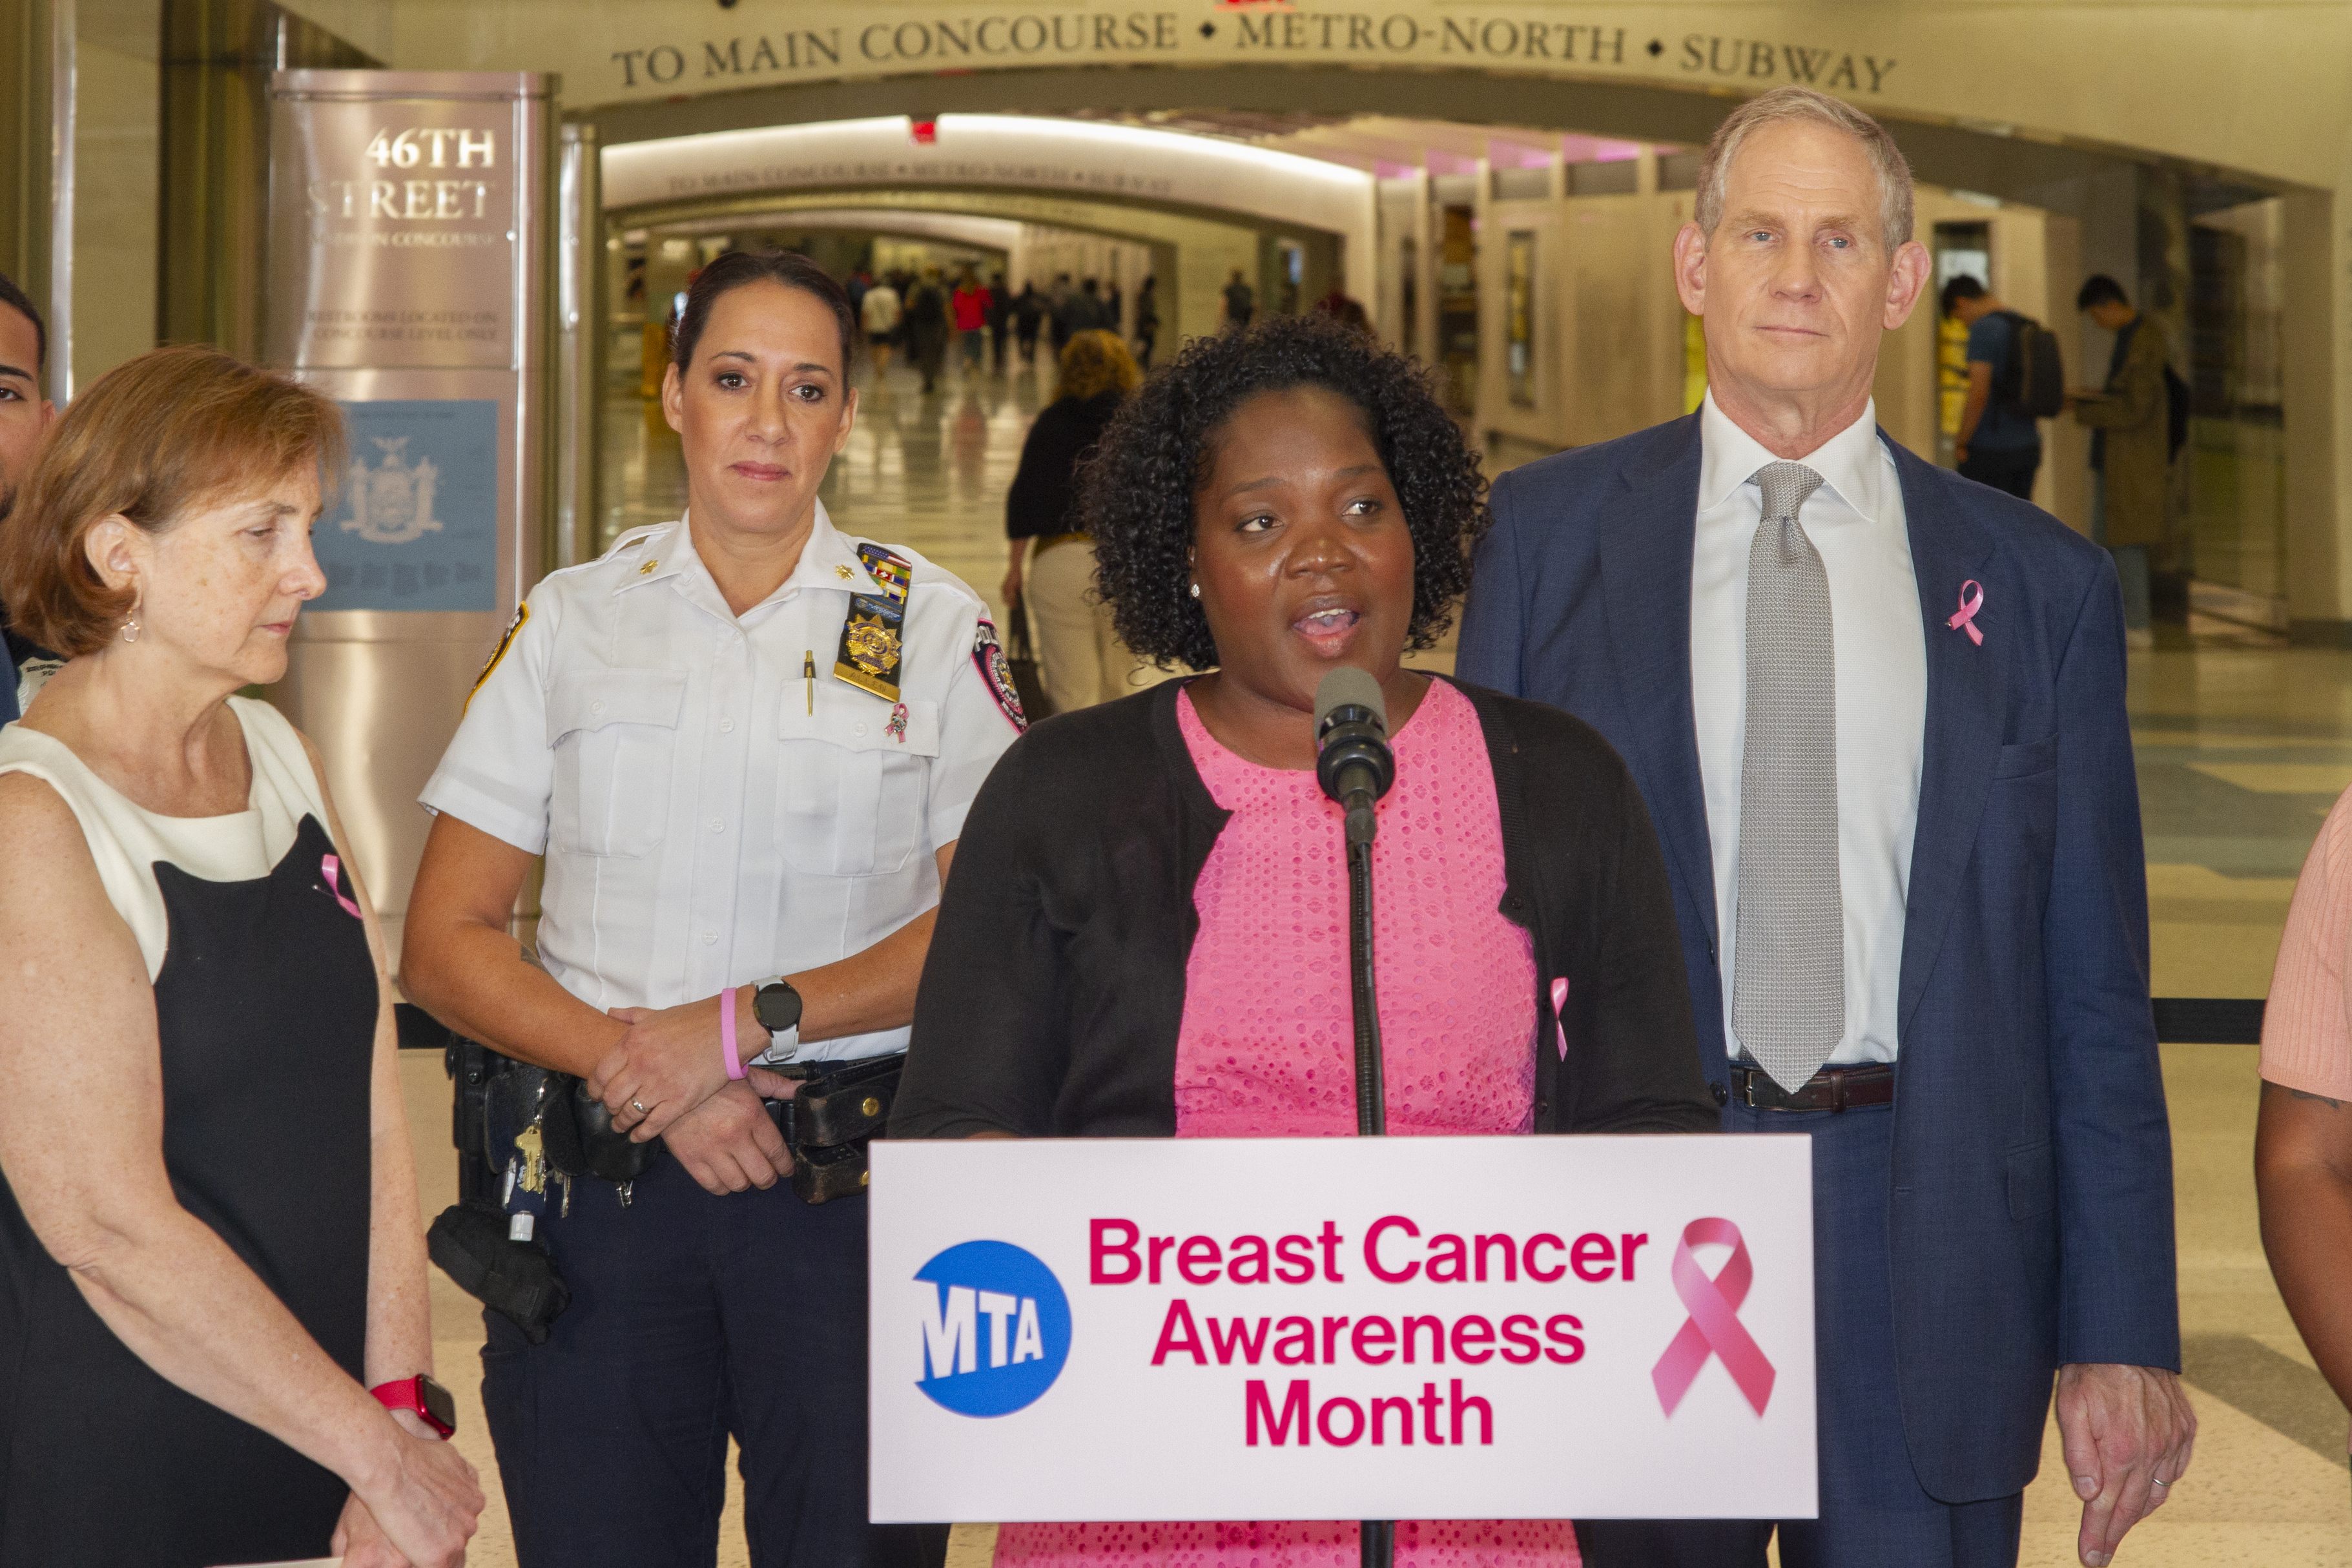 MTA Celebrates Breast Cancer Awareness Month with Pink Ribbon Distribution and Public Information Campaign 